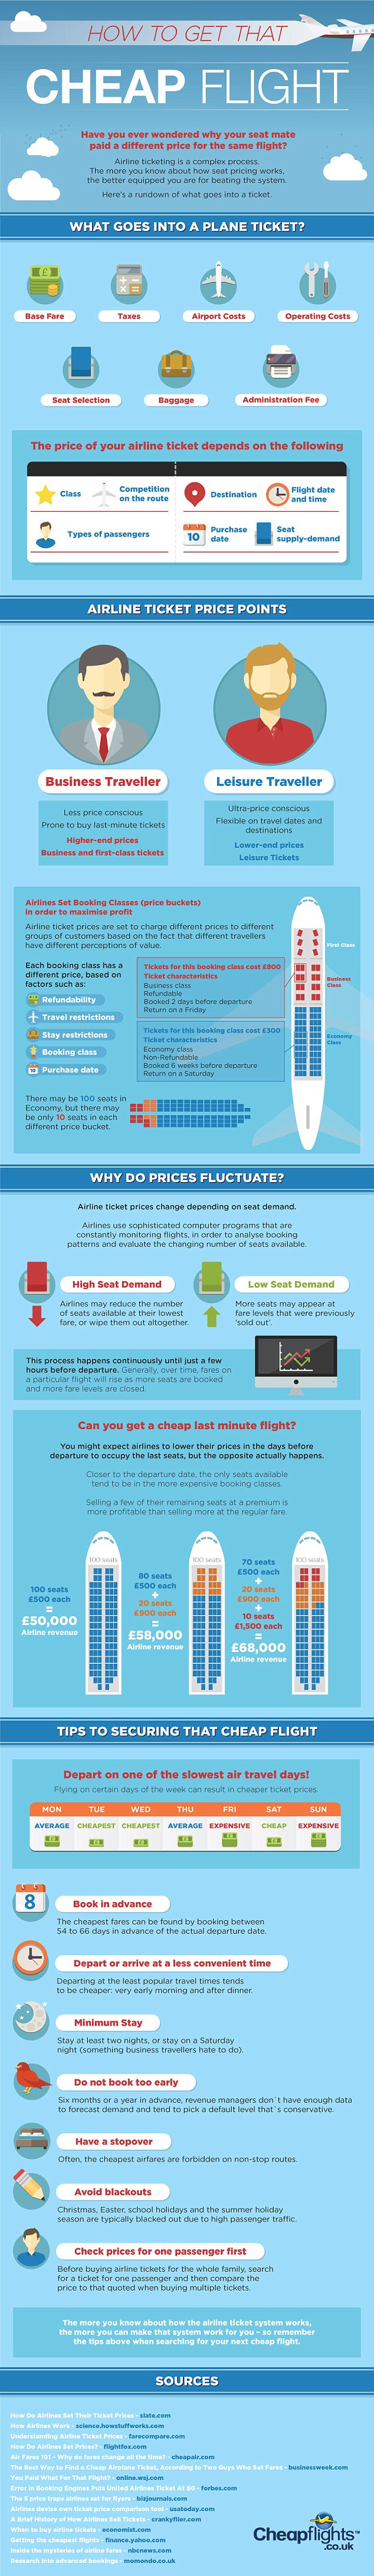 infographic airline ticket prices